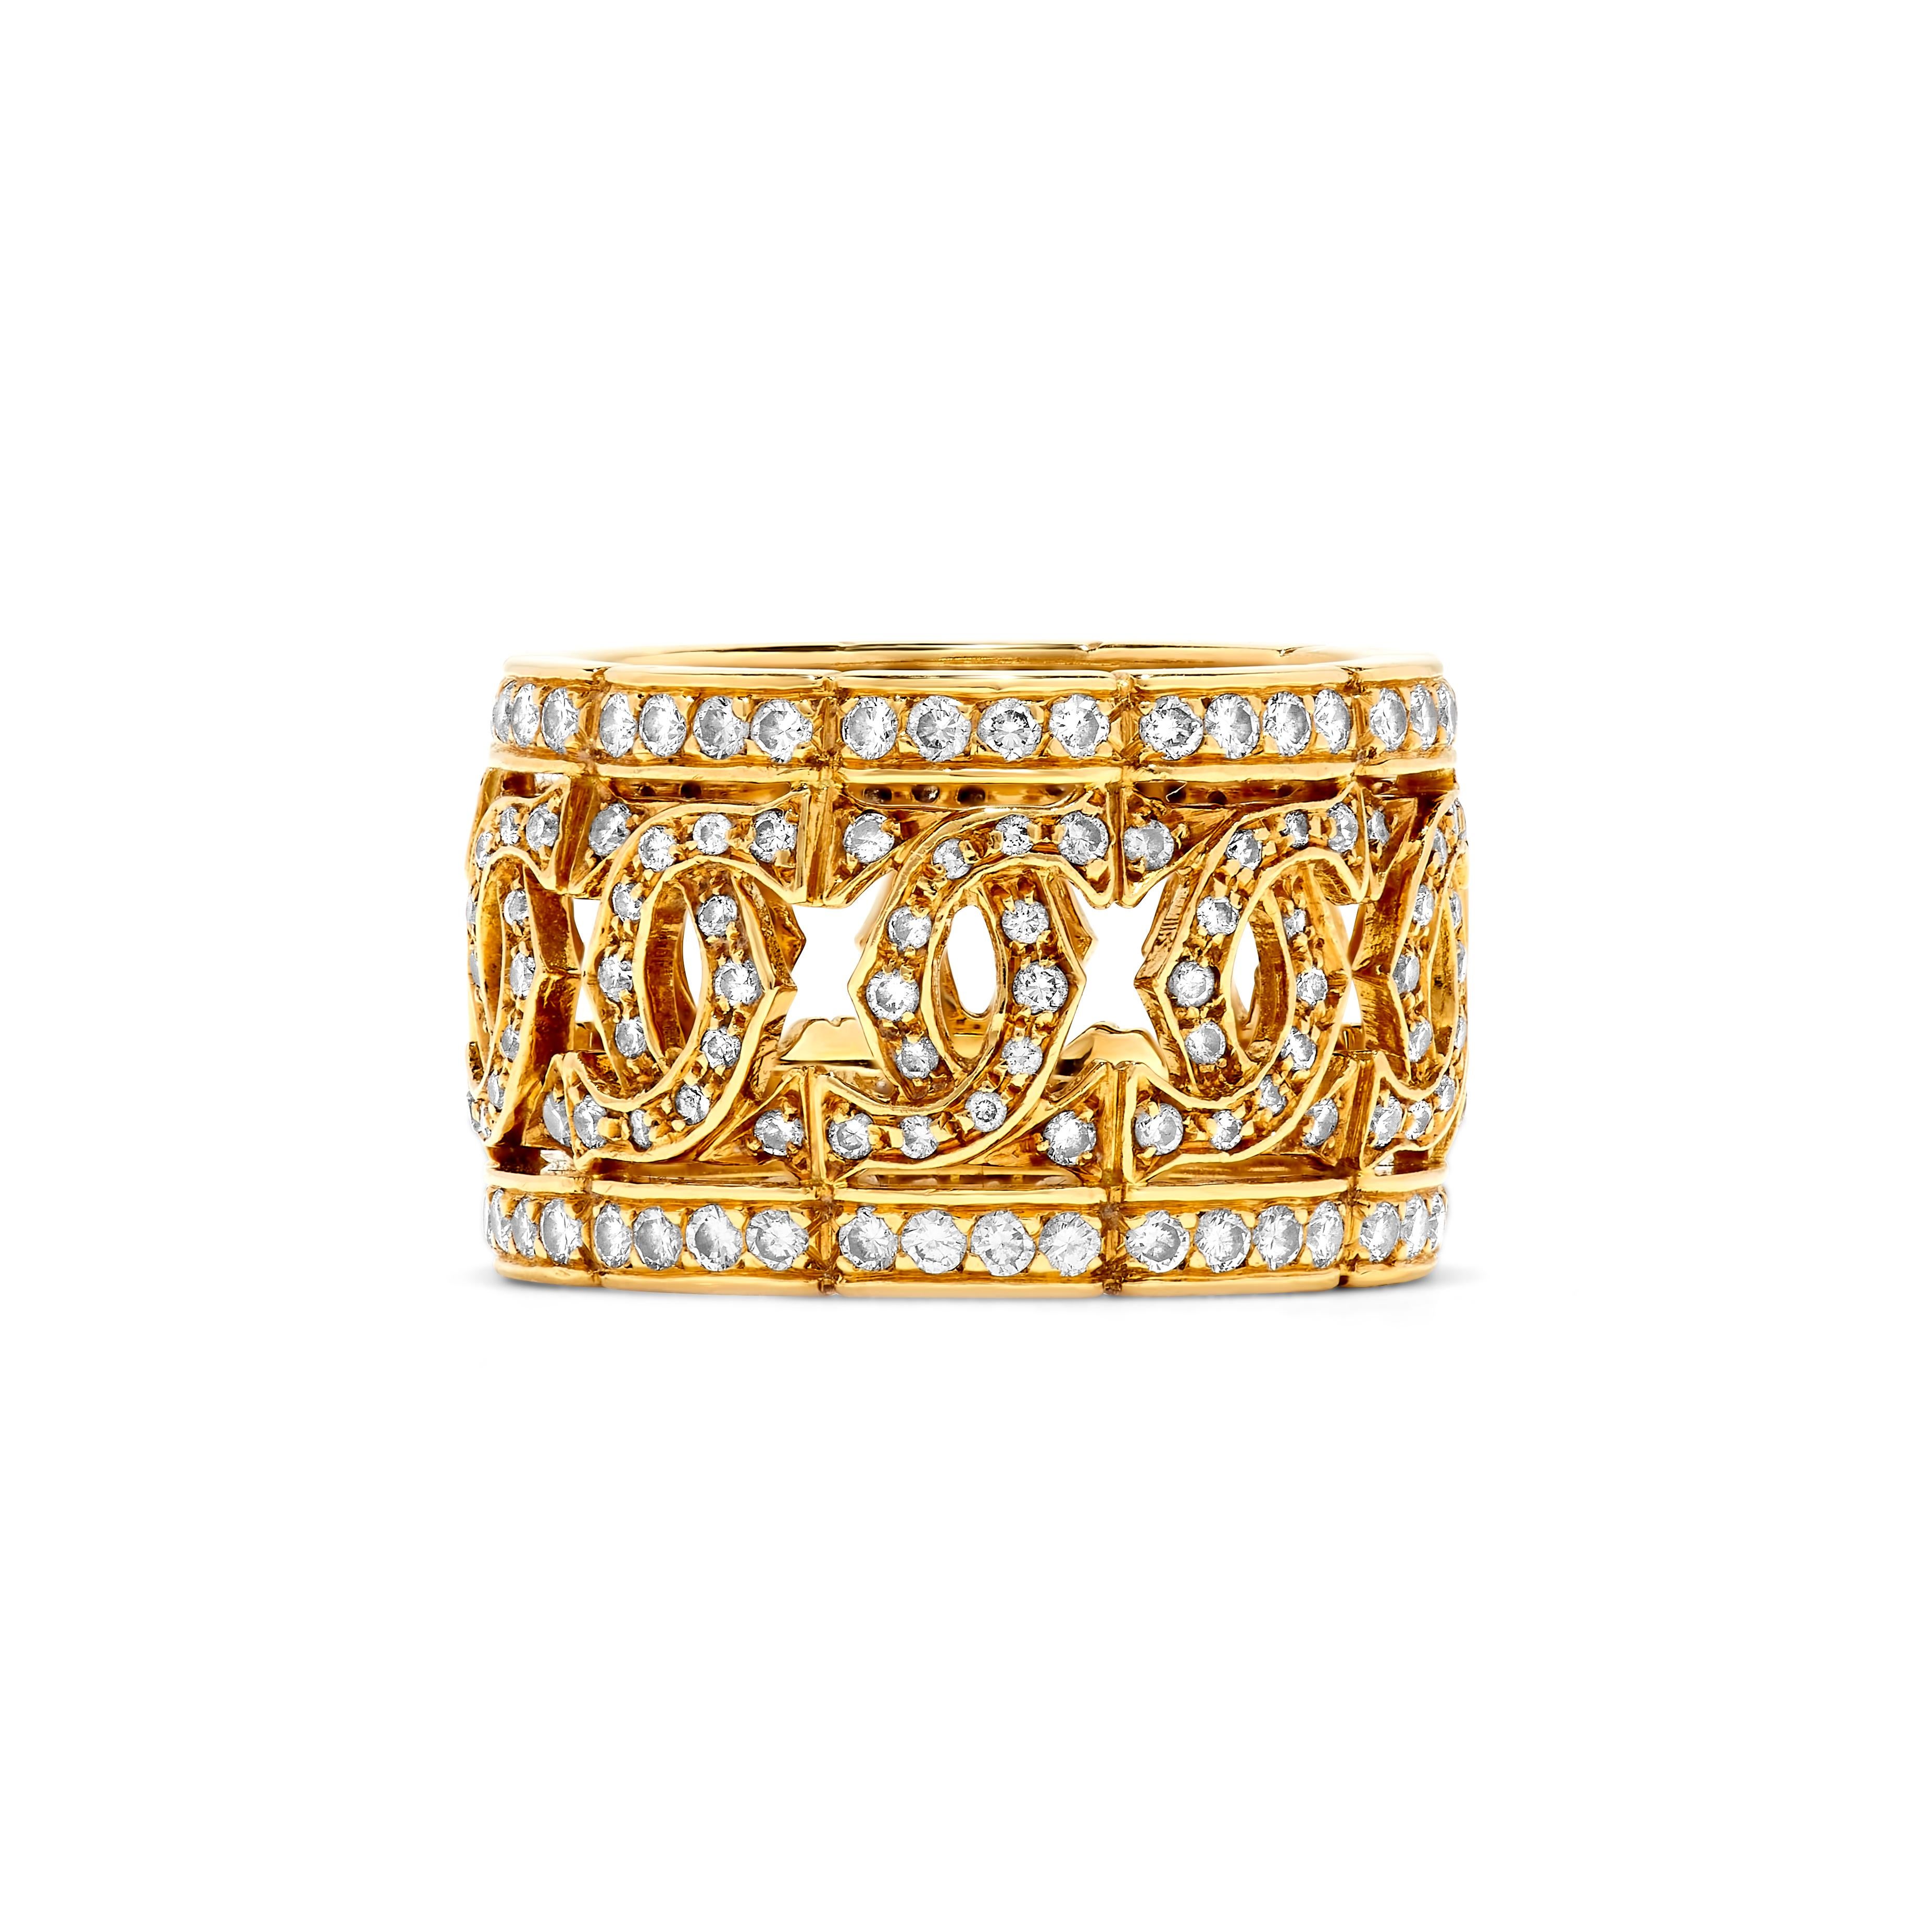 This classic Cartier diamond ring features approximately 2.00 carats of F-H, VVS-VS round diamonds. Mounting stamped 750 for 18K Yellow gold. Size 5 1/2. Approximately 1/2 inch width. Signed Cartier. Numbered 714133, with French workshop mark. Circa